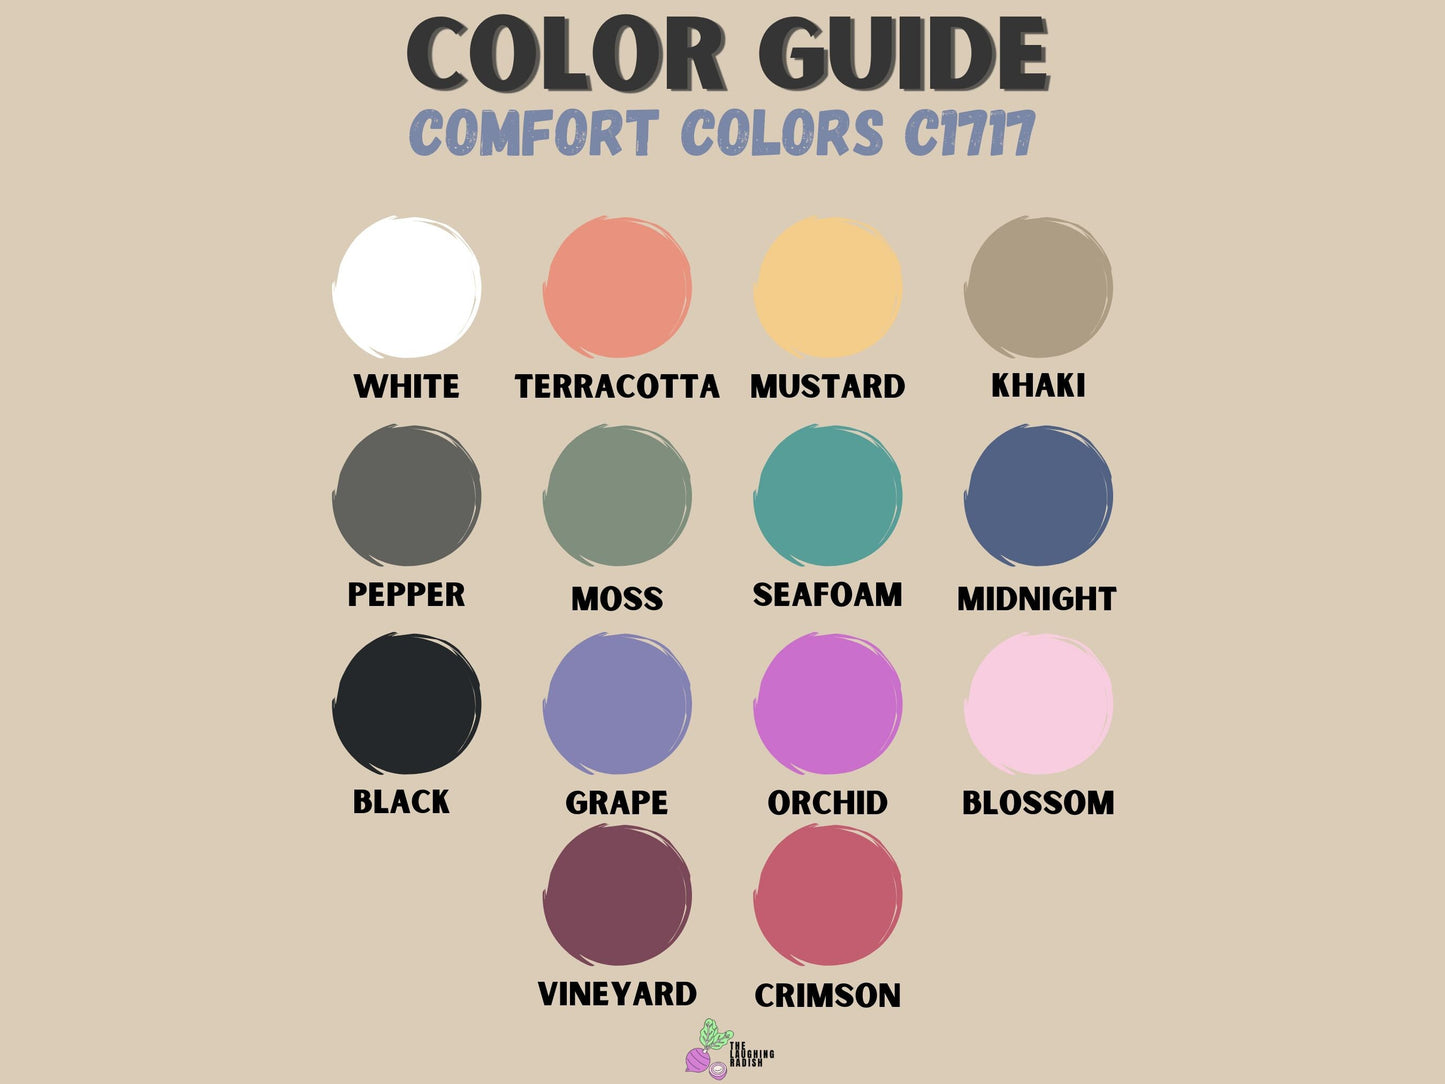 A color guide matching colors with shirt text options including mustard, pepper, bay, seafoam, crunchberry, and crimson